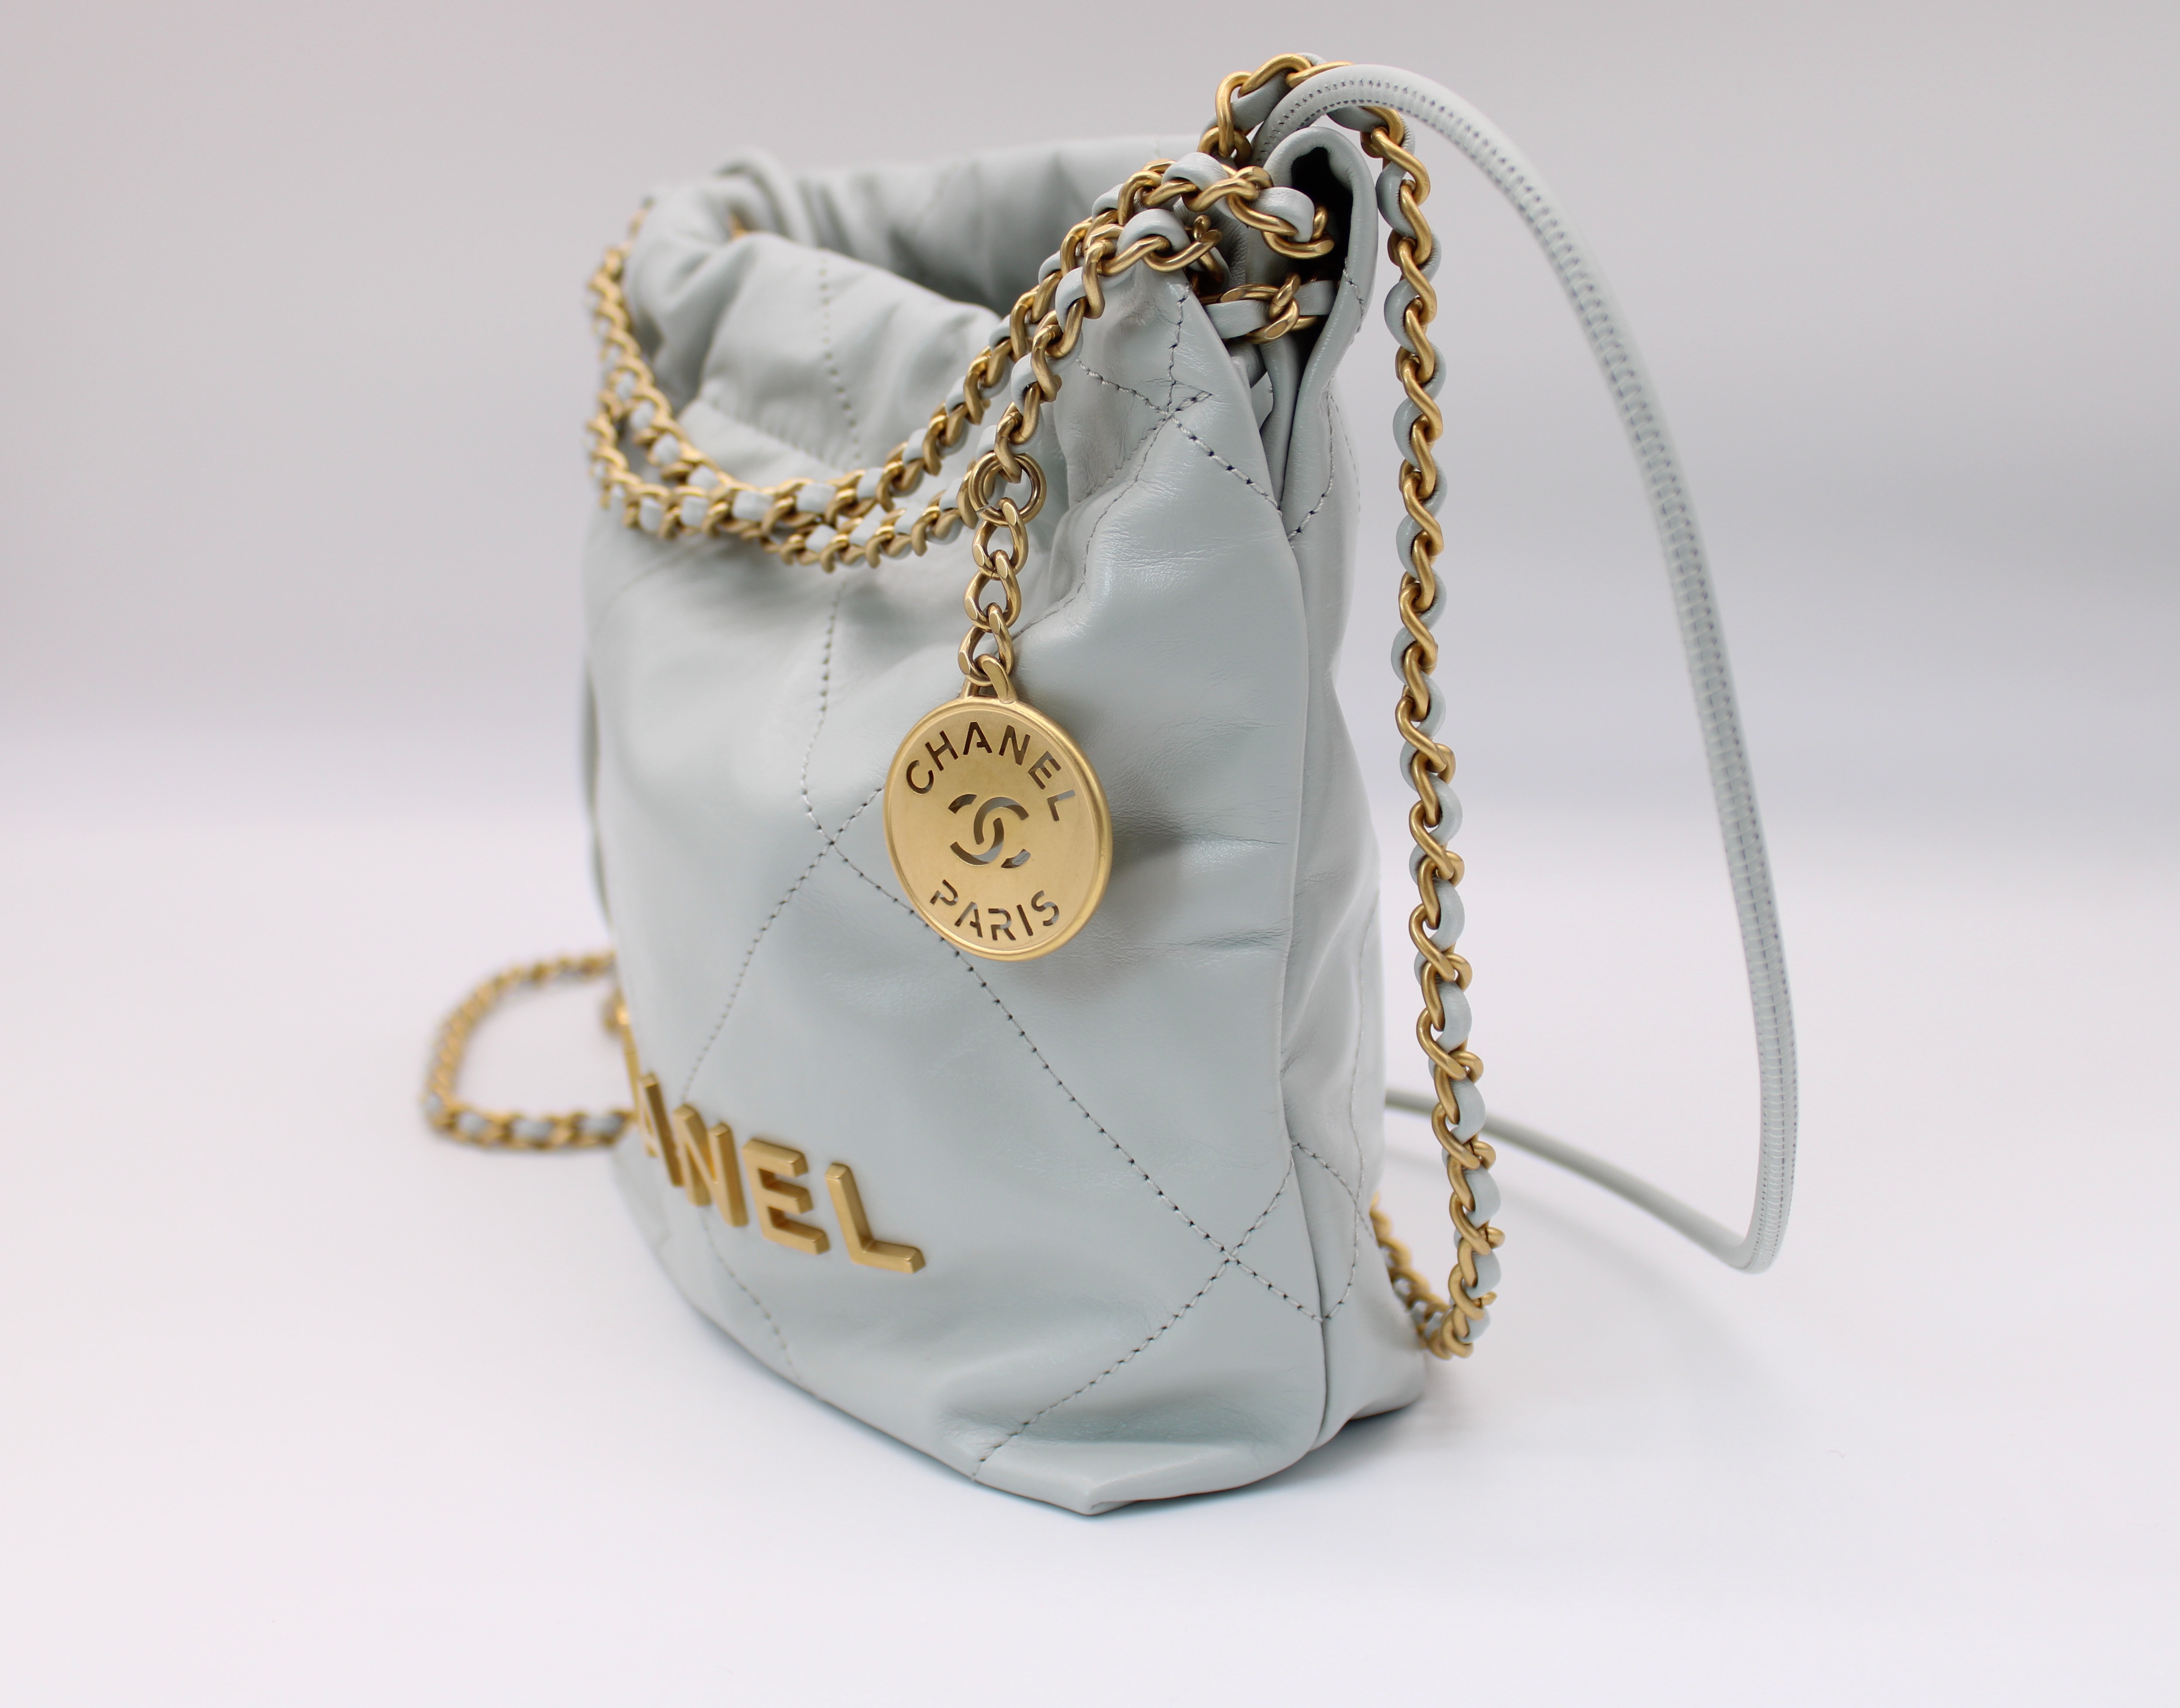 Chanel 22, Mini, Blue Leather With Gold Hardware, New in Box MA001